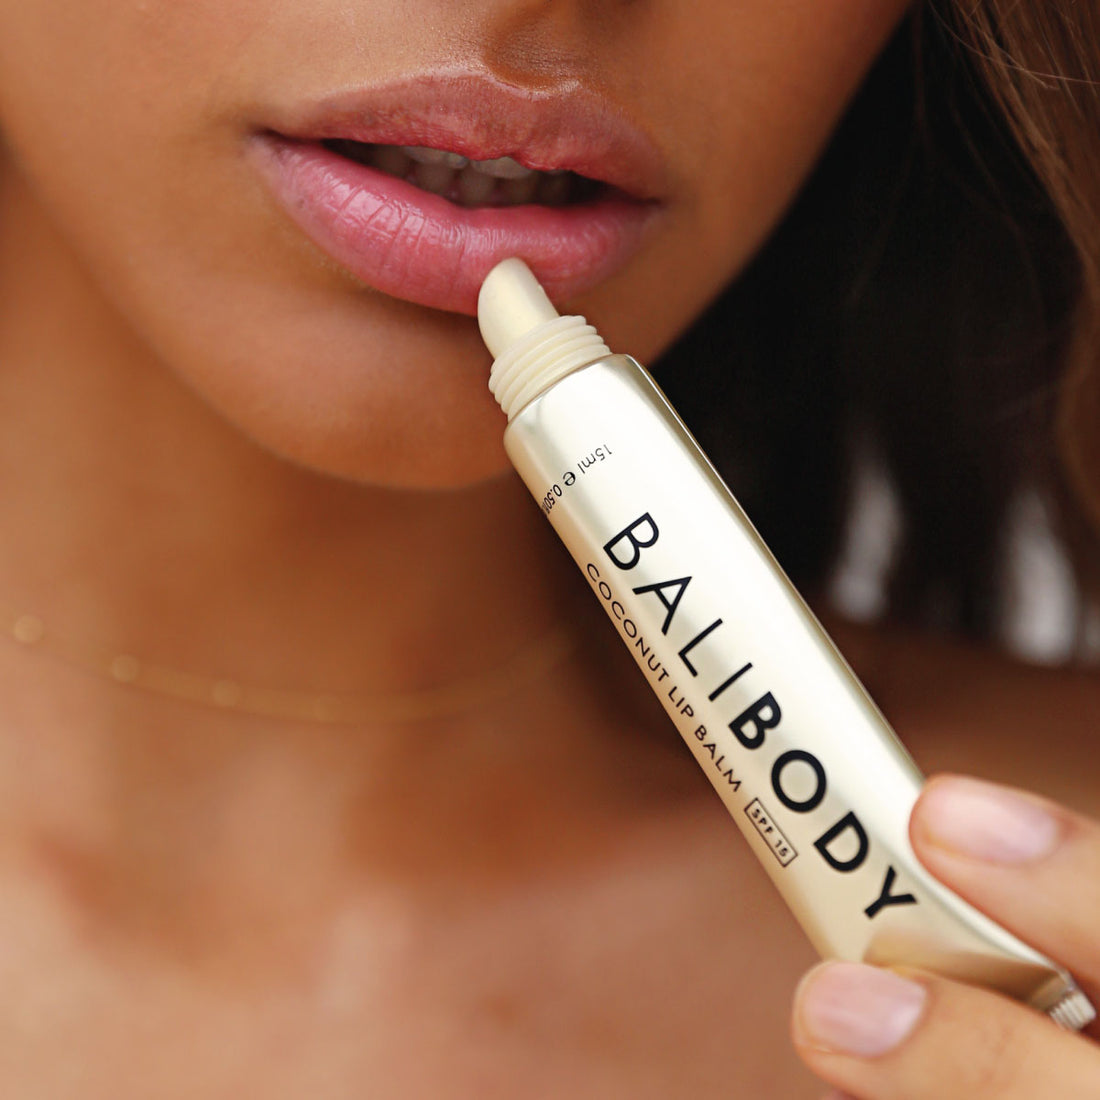 Kiss Away Dry Lips for Good with Bali Body’s Coconut Lip Balm